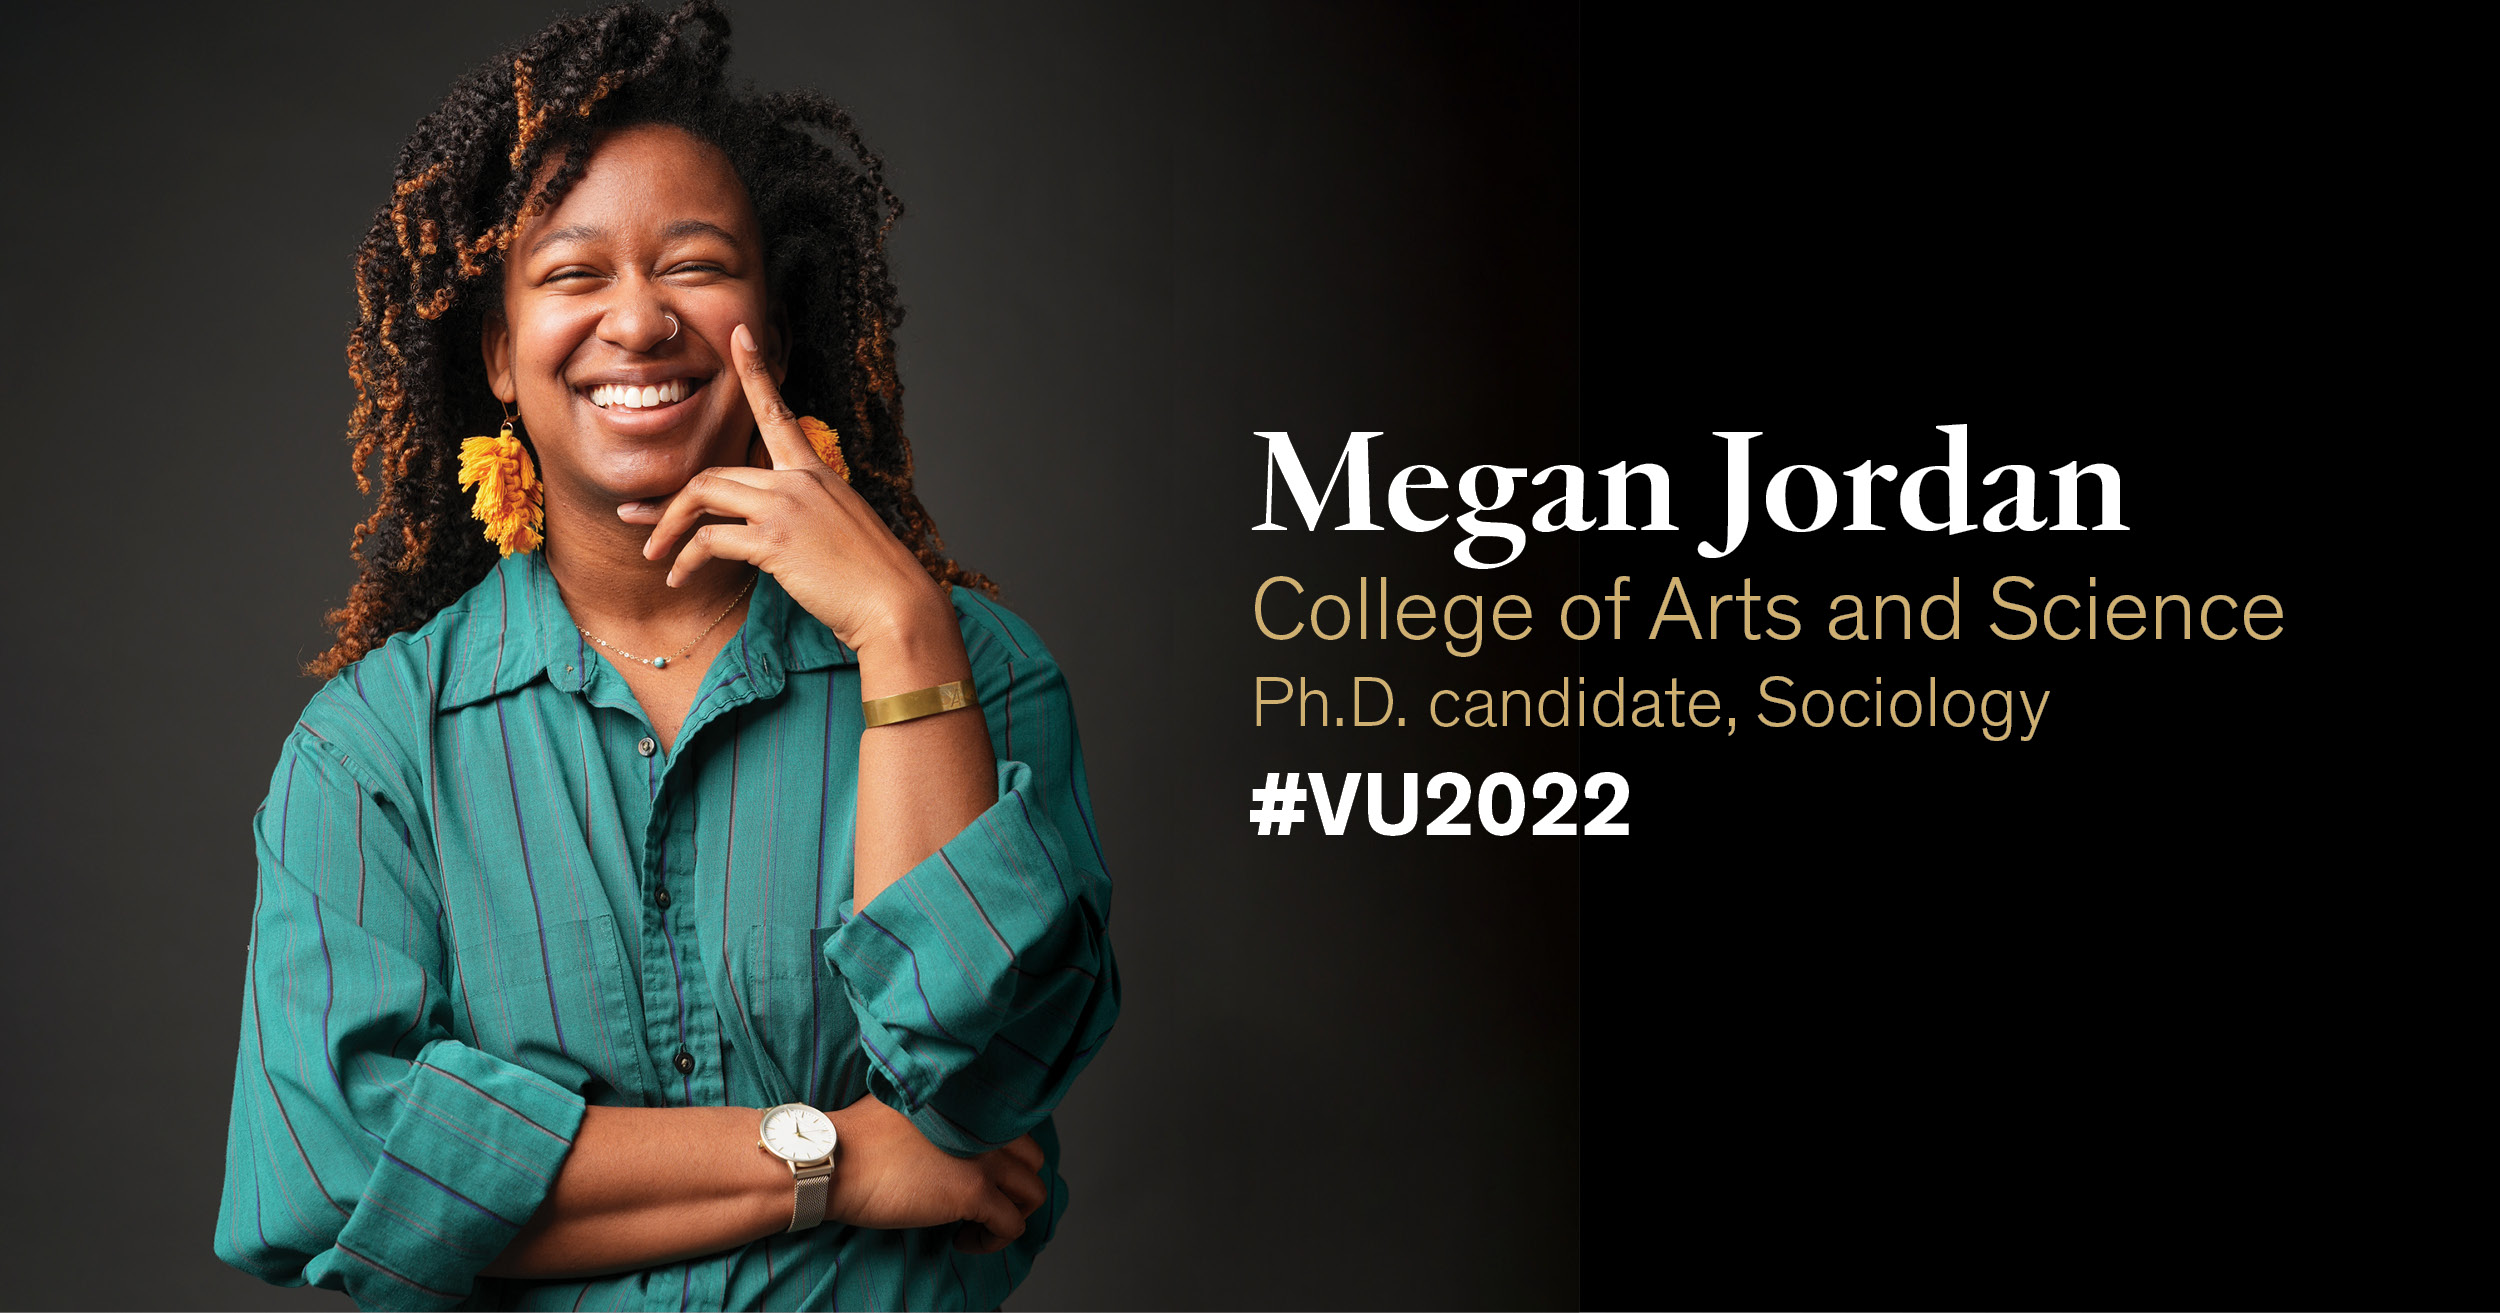 Class of 2022: Megan Jordan works at the intersection of art and social justice